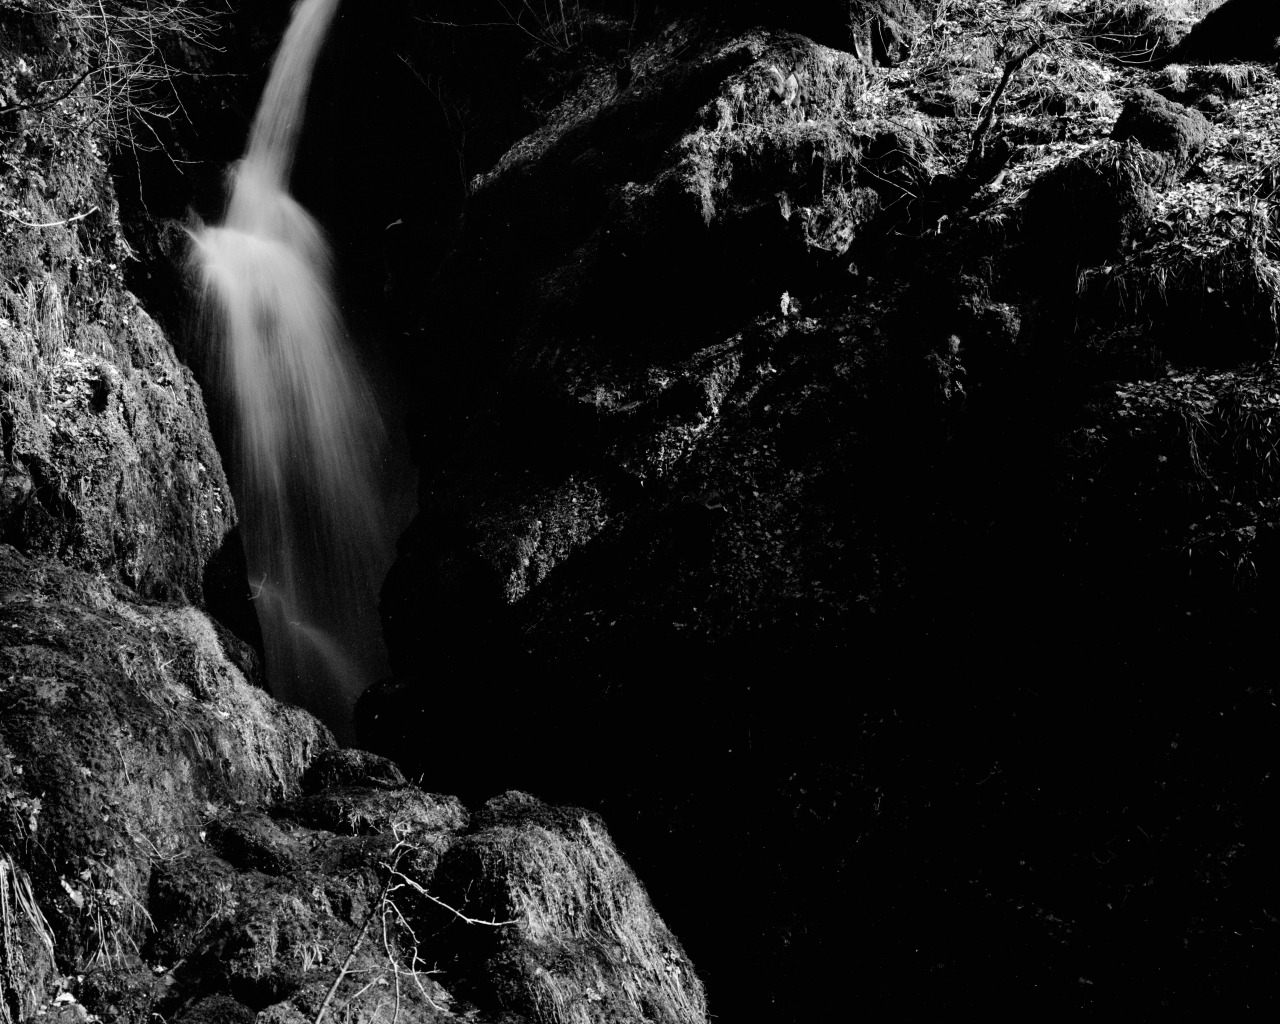 A Waterfall in the Lake District.
5x4 FOMAPAN 100.